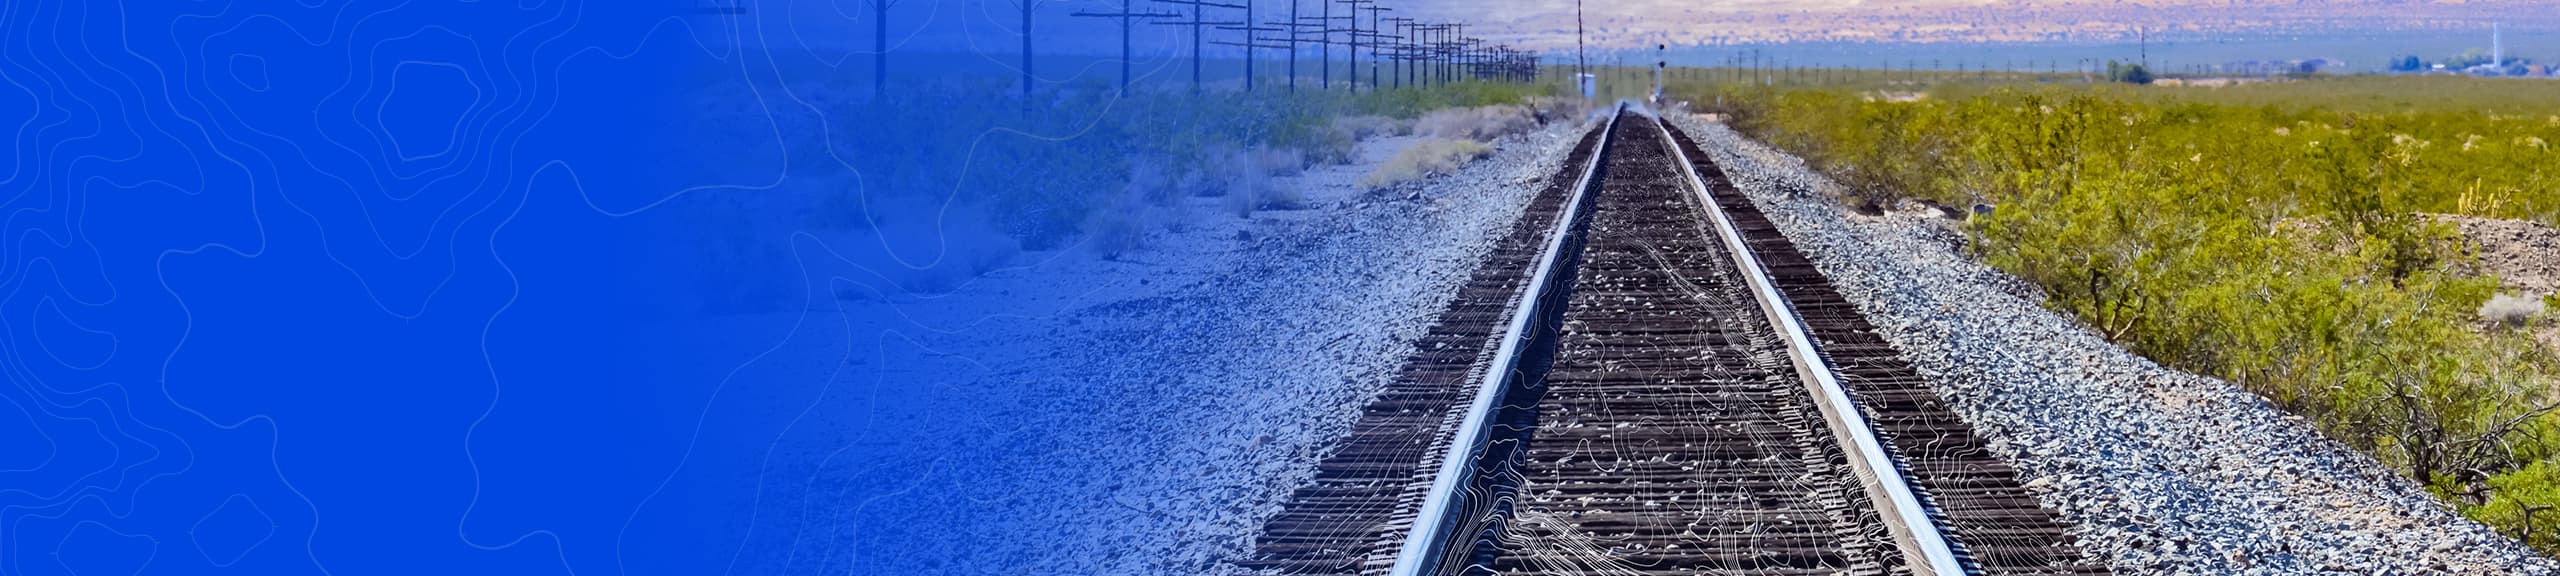 Train tracks overlaid with faint map elements receding into the distance with a gravel bed and grass on the right